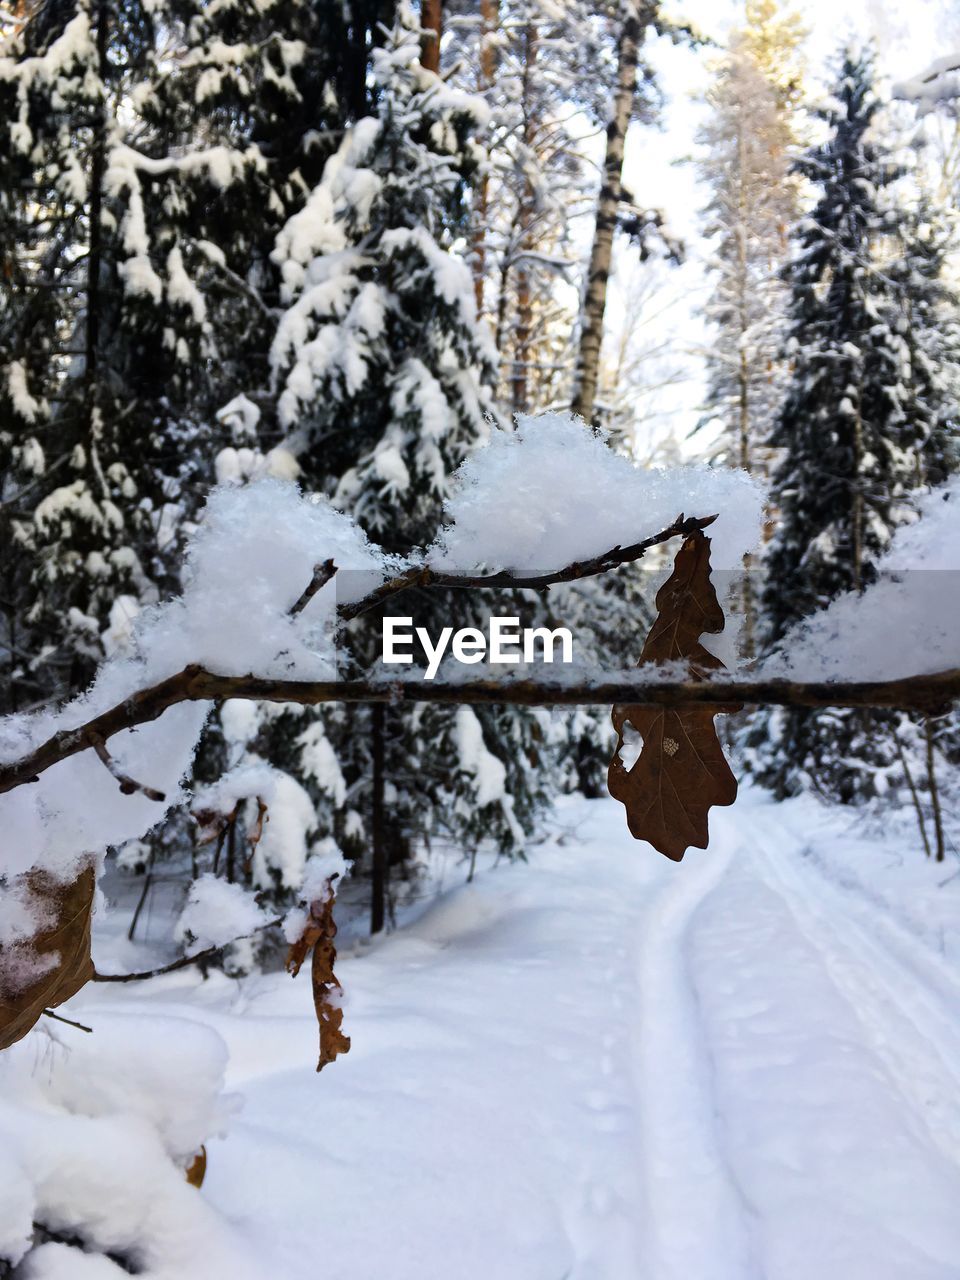 SNOW COVERED TREE IN FOREST